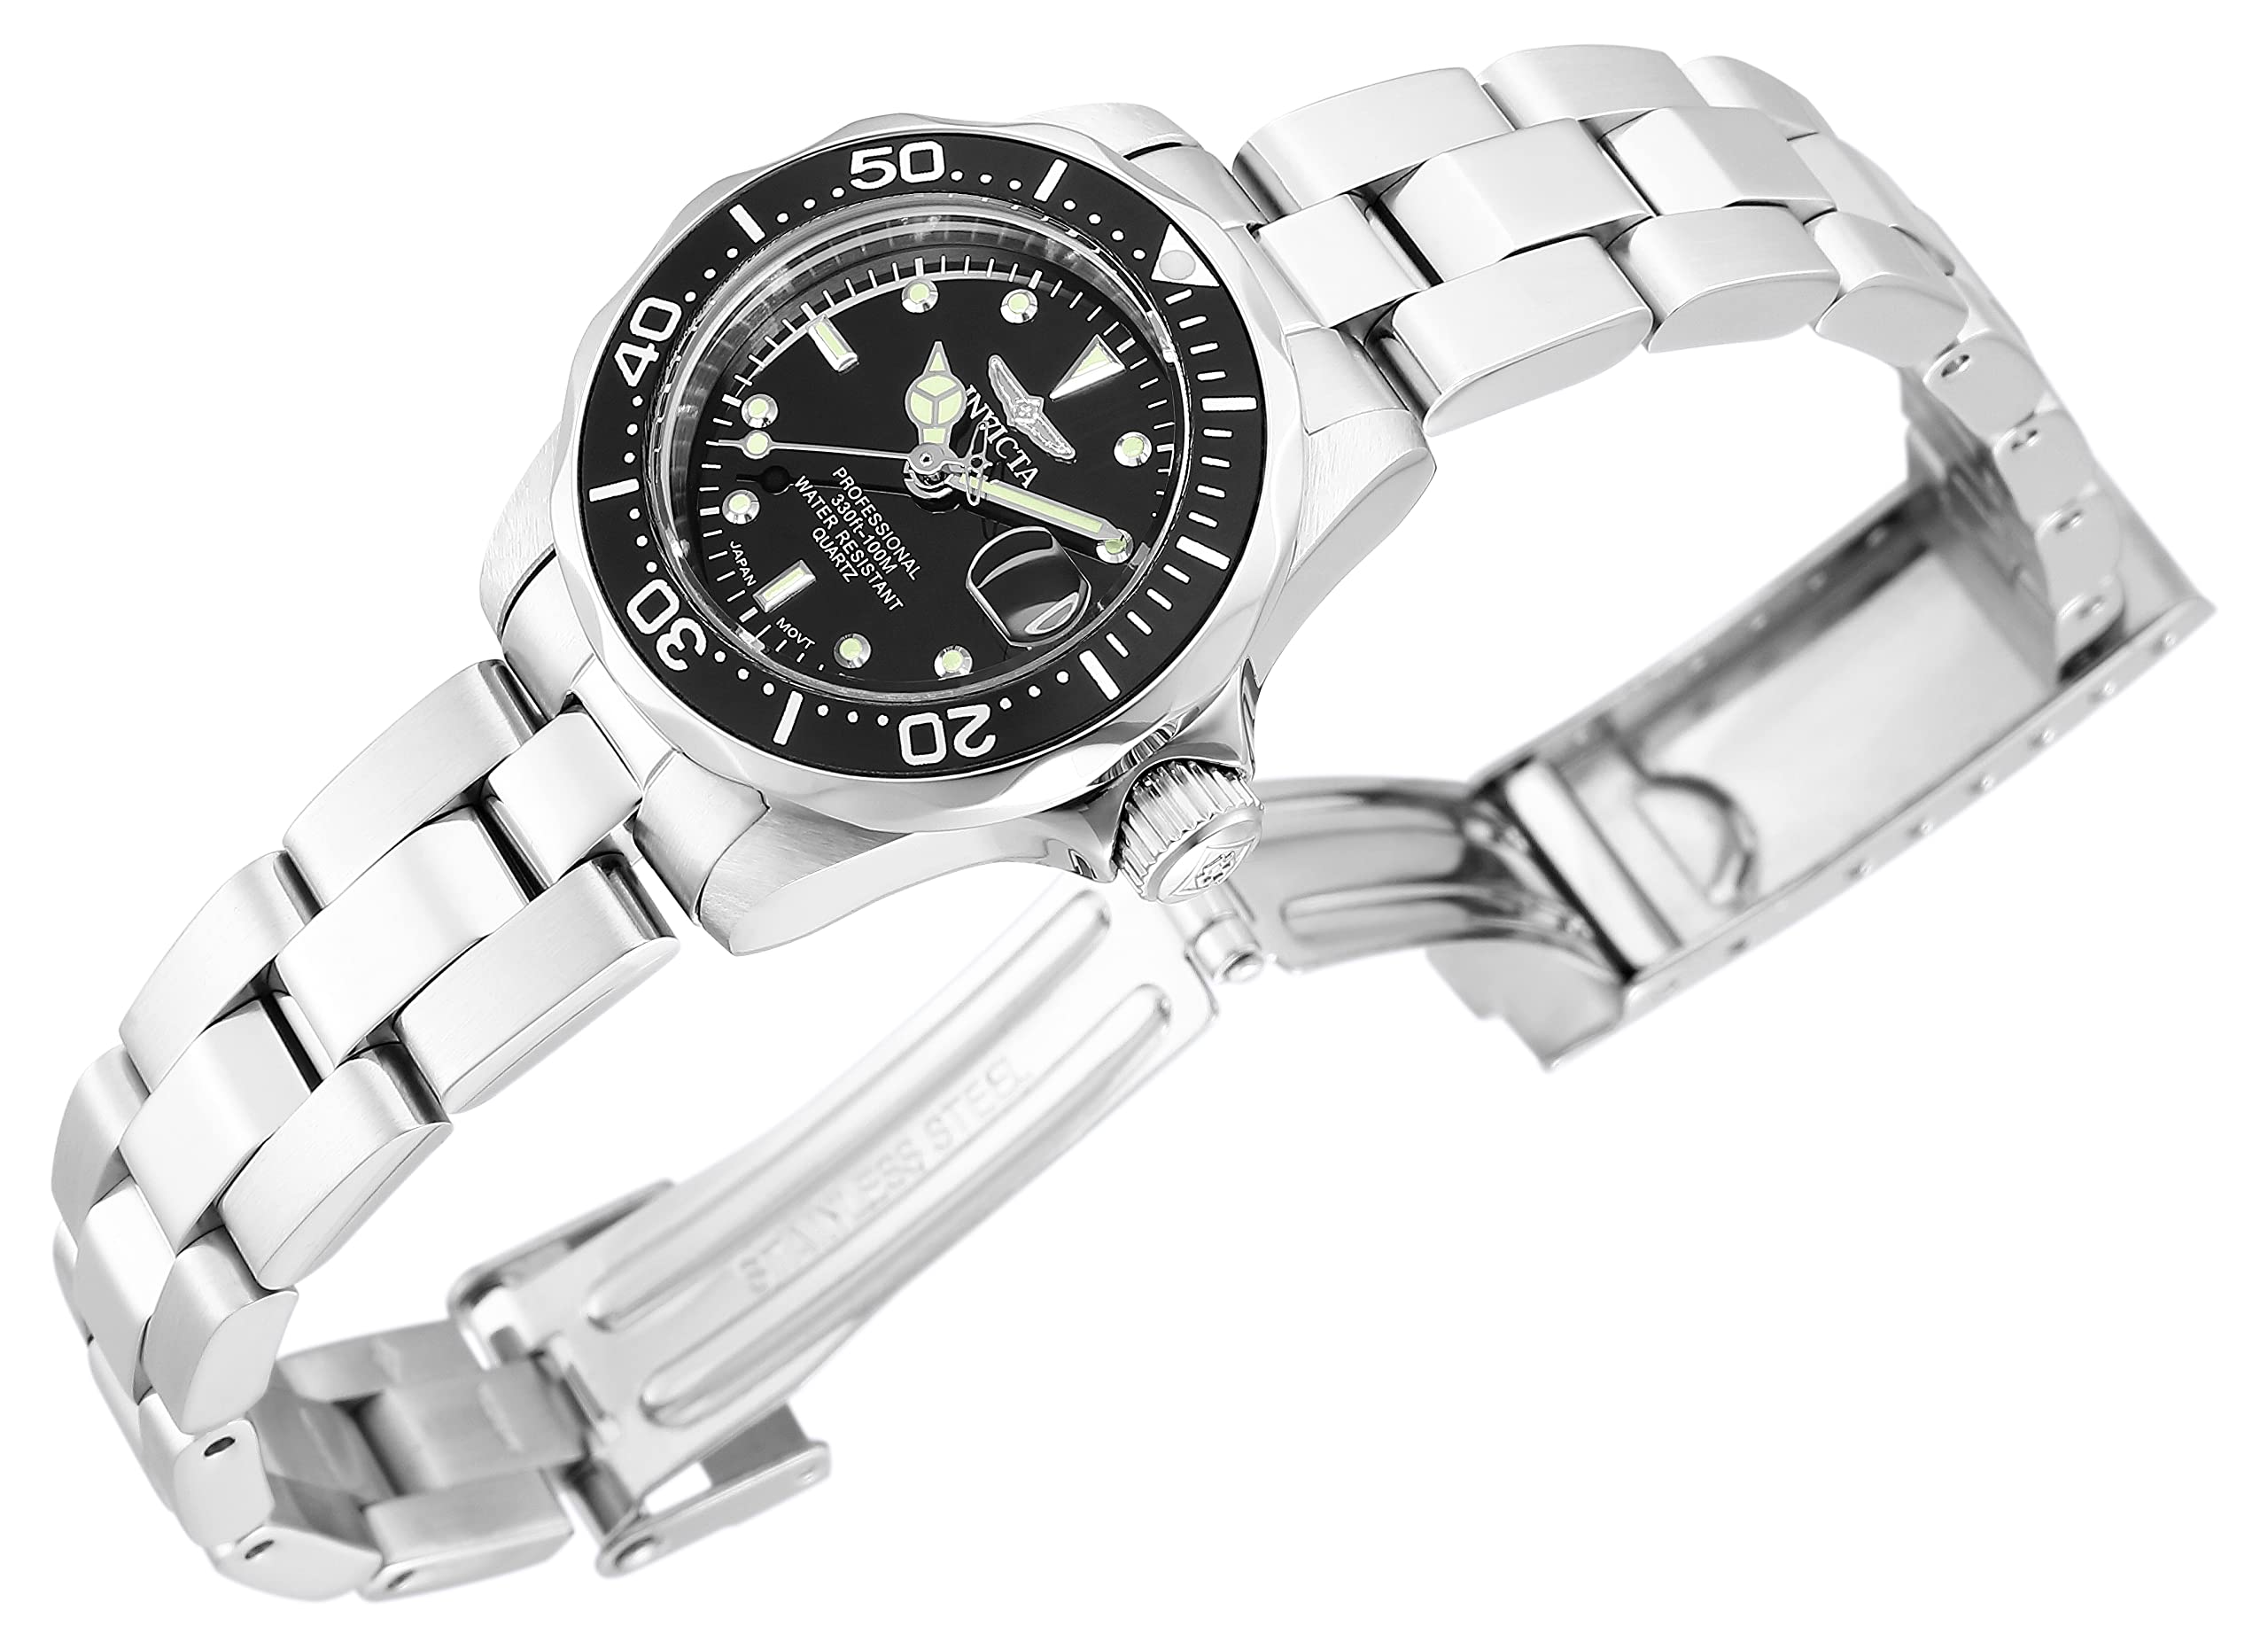 Invicta Women's Pro Diver Collection Watch